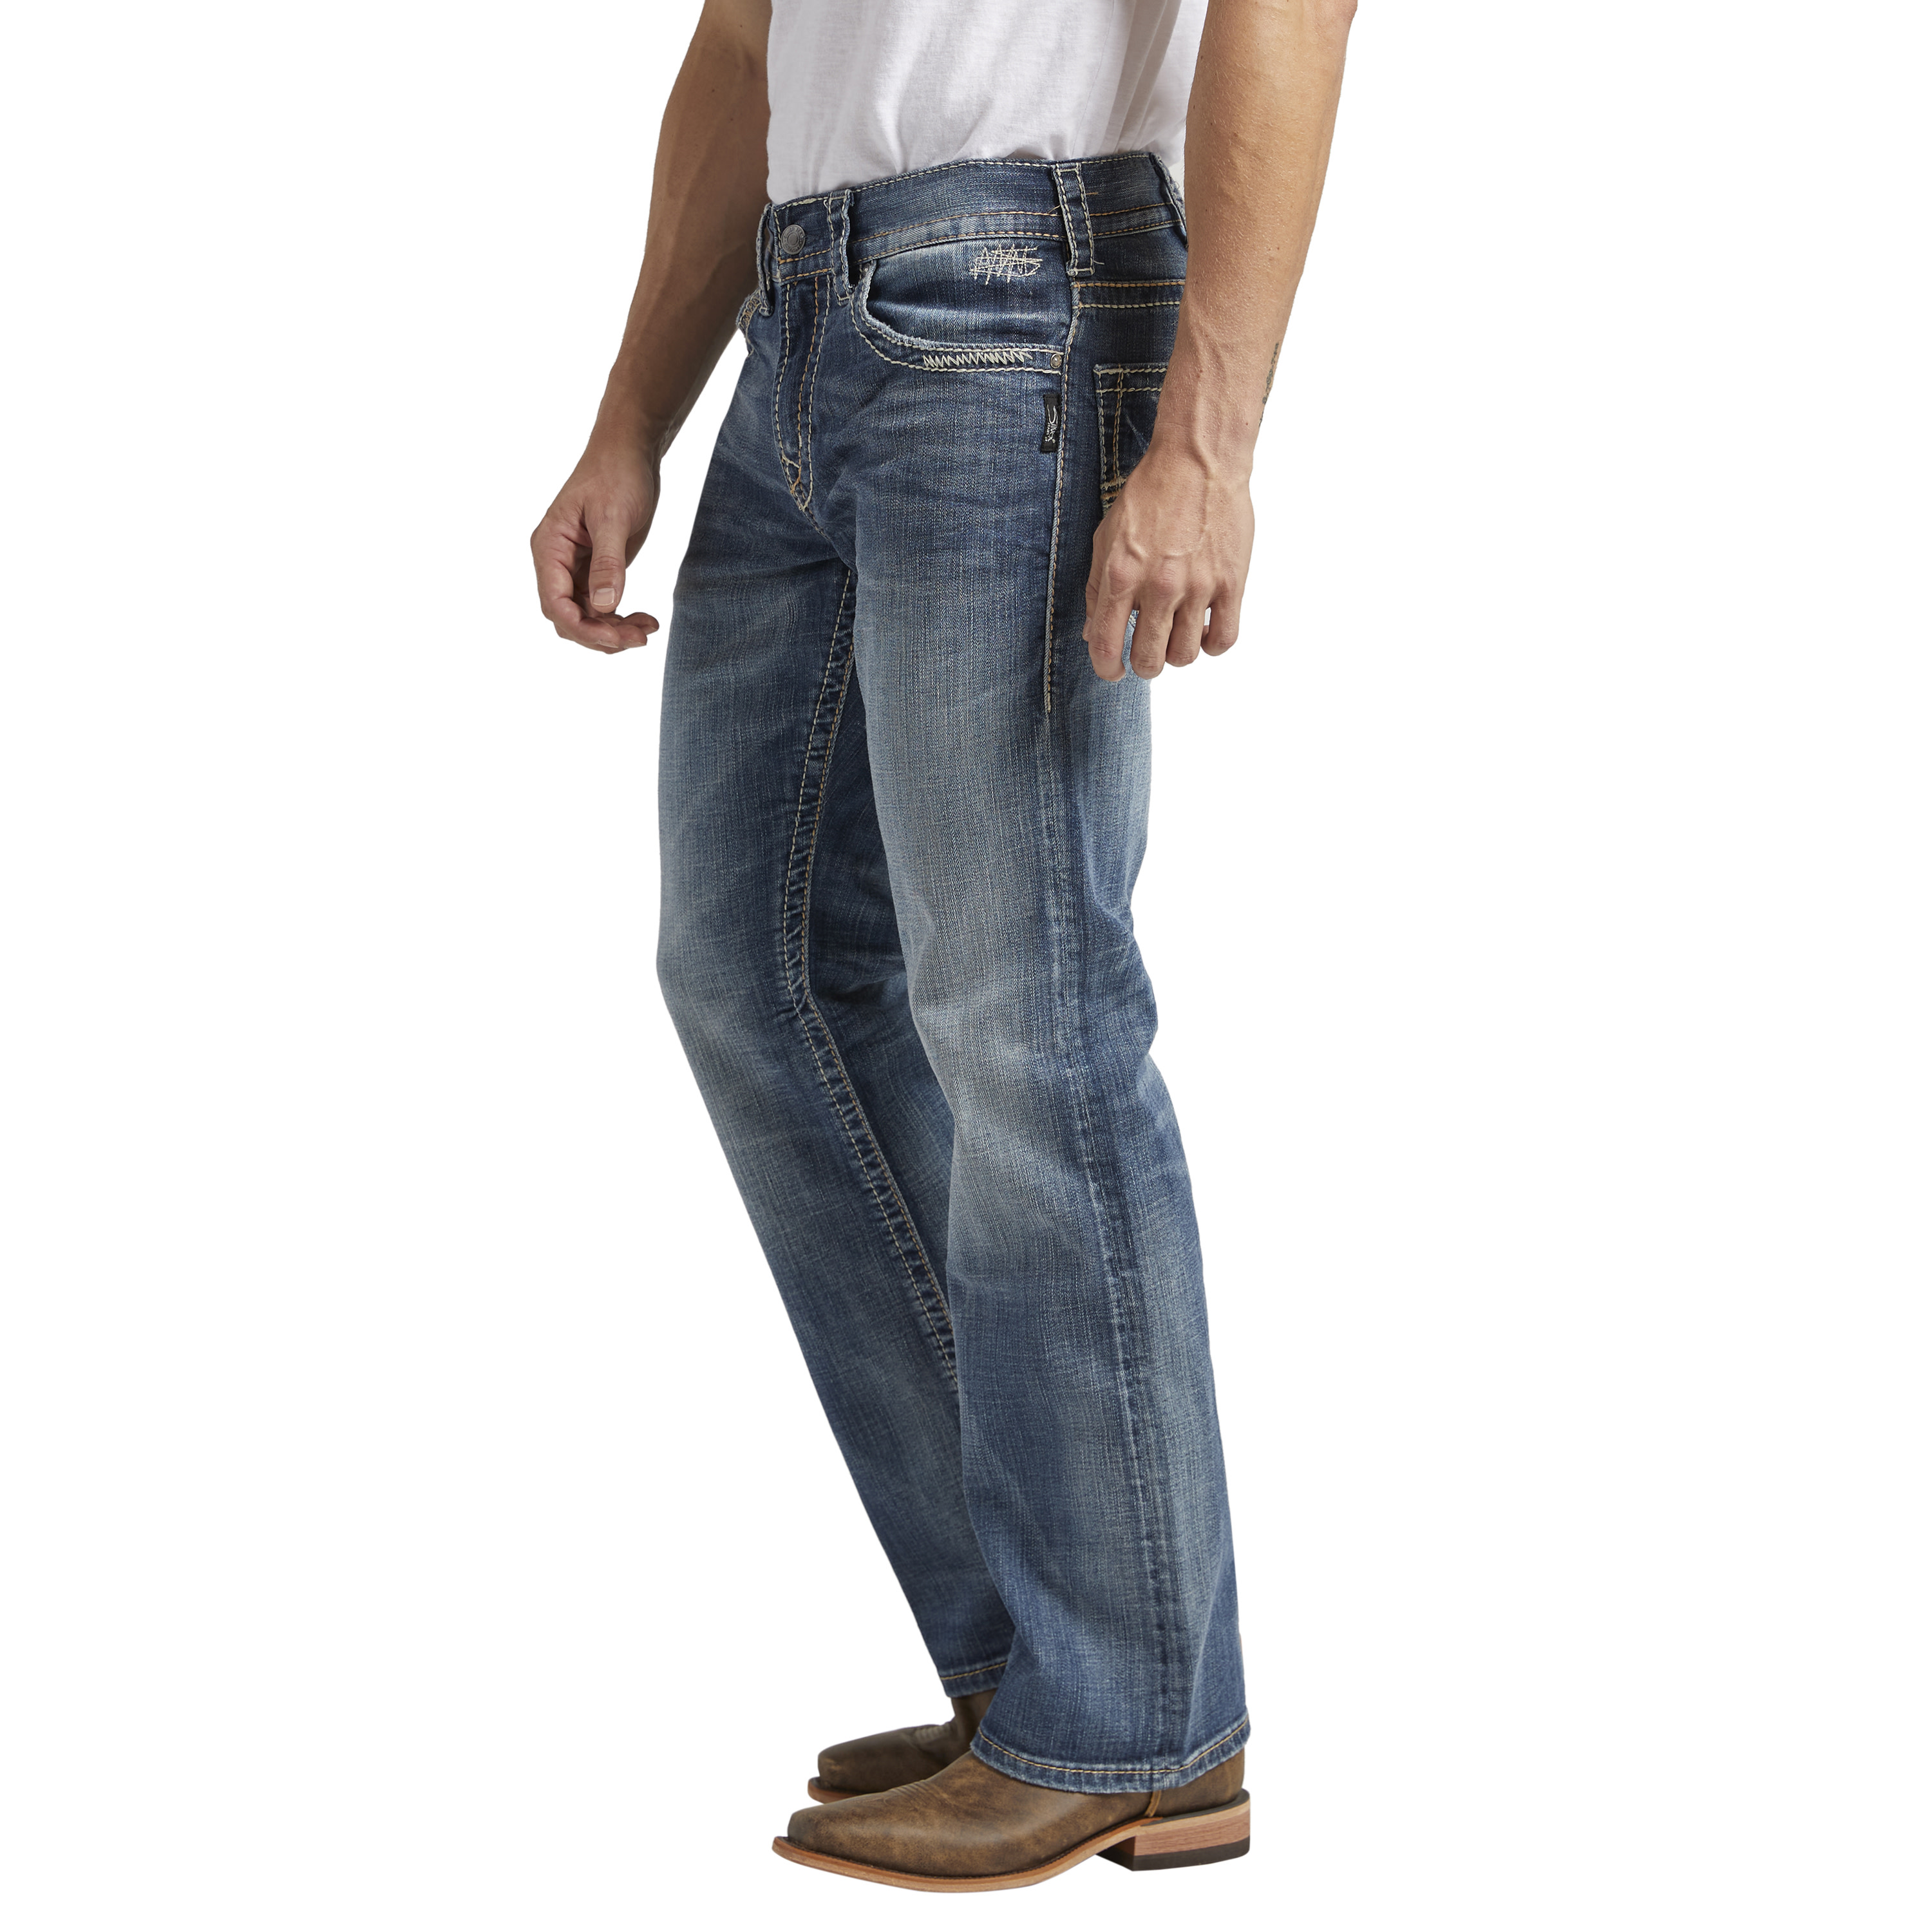 Silver Jeans Co. Men's Zac Relaxed Fit Straight Leg Jeans, Waist Sizes 30-42 - image 3 of 4